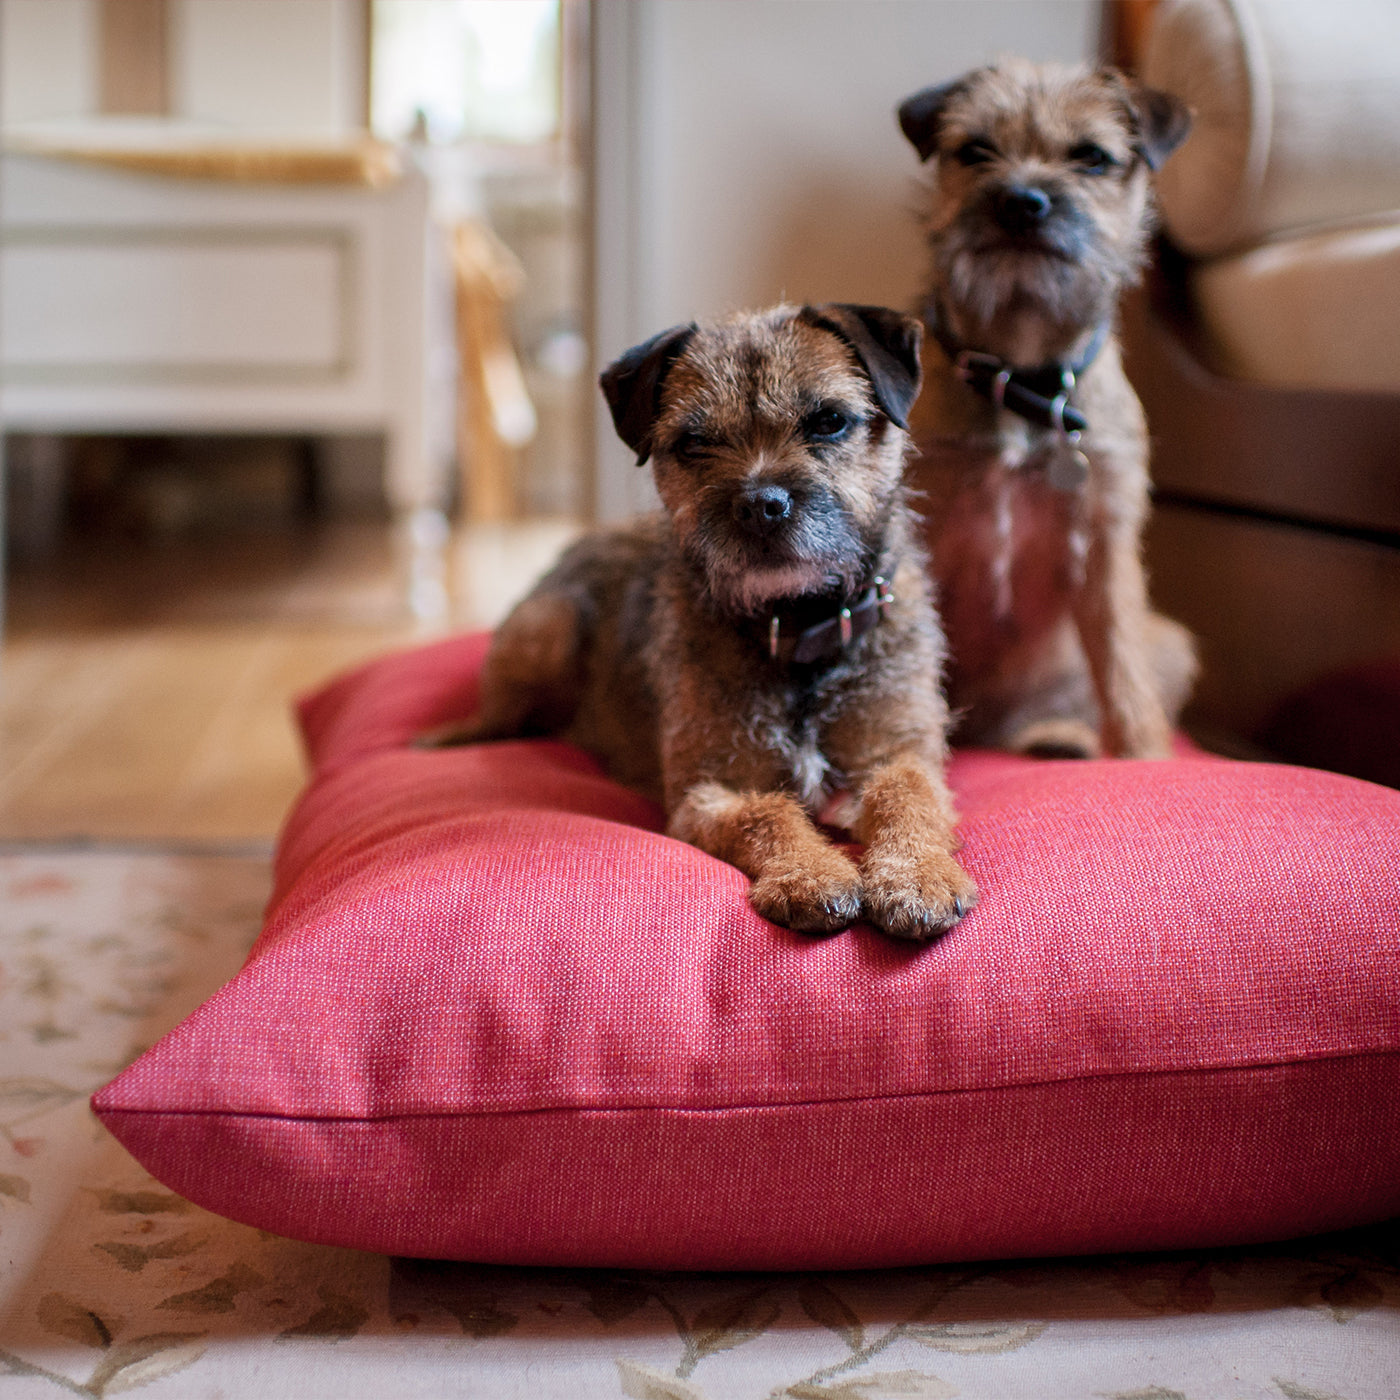 The Lounging Hound Twist Pillow Bed In Cerise, Luxury Dog Beds & Pillows, Available Now at Lords & Labradors